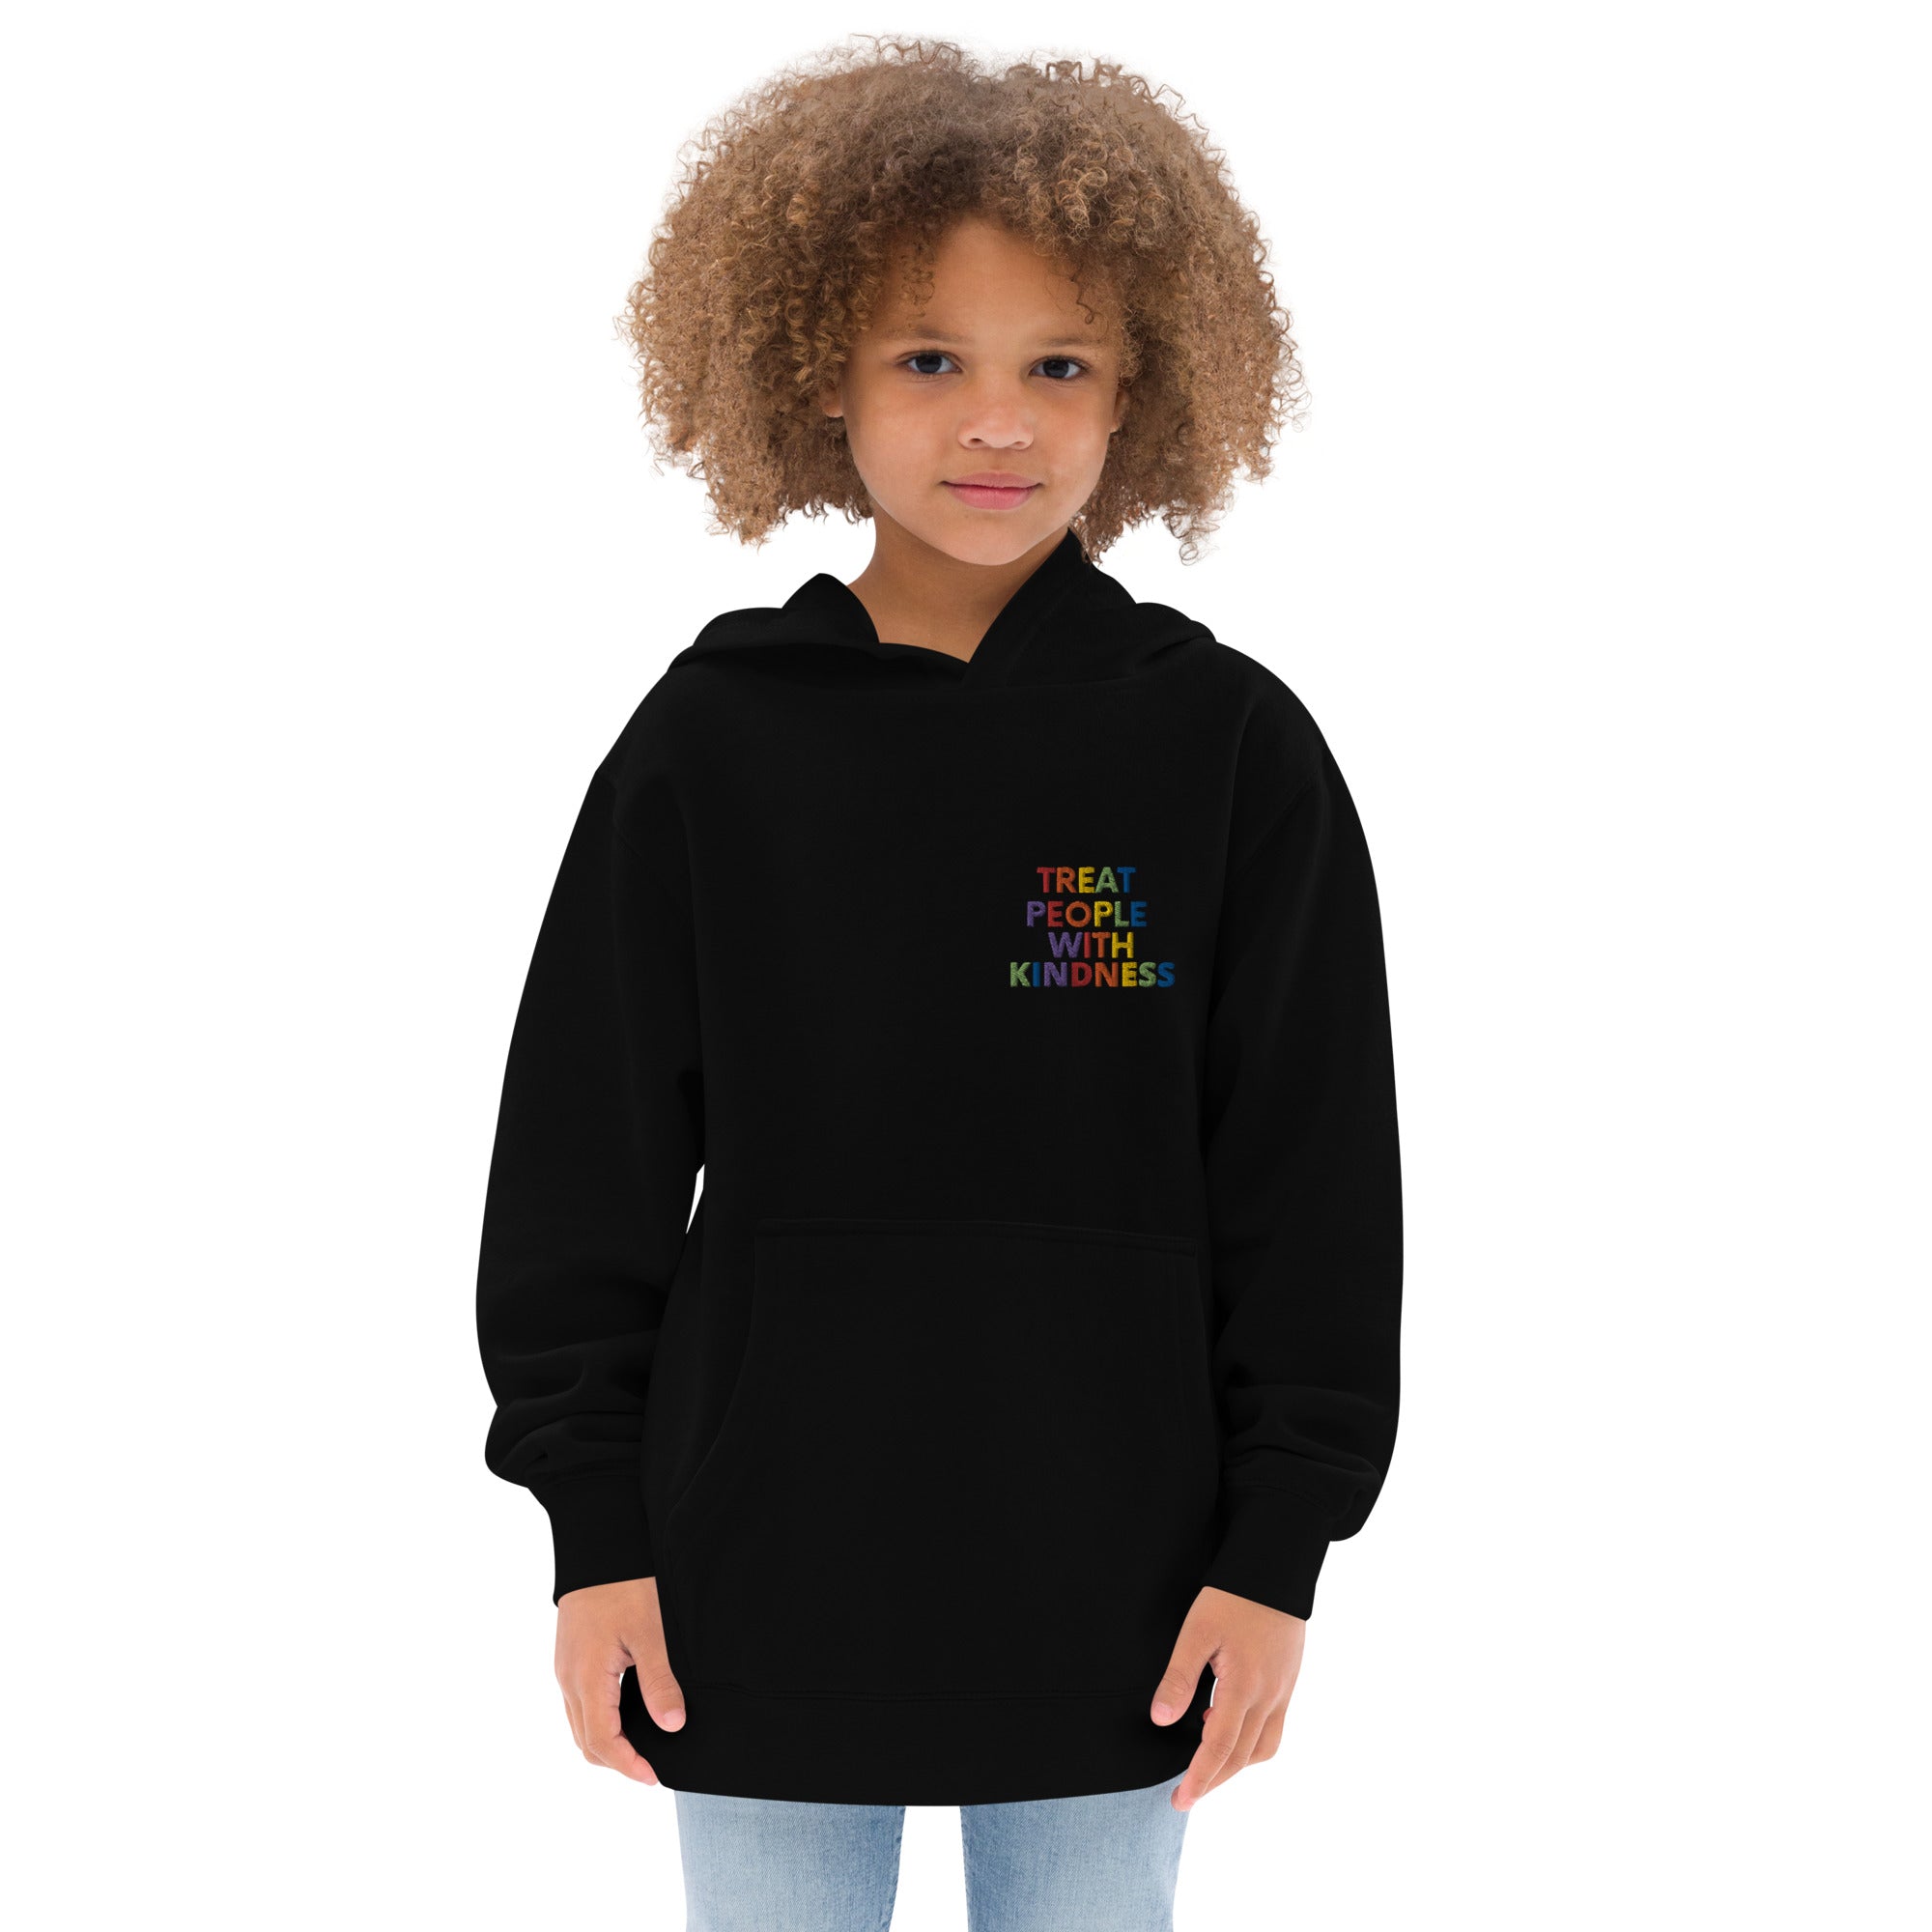 Rainbow Kindness Youth Unisex Fleece Embroidered Hoodie - The Kindness Cause